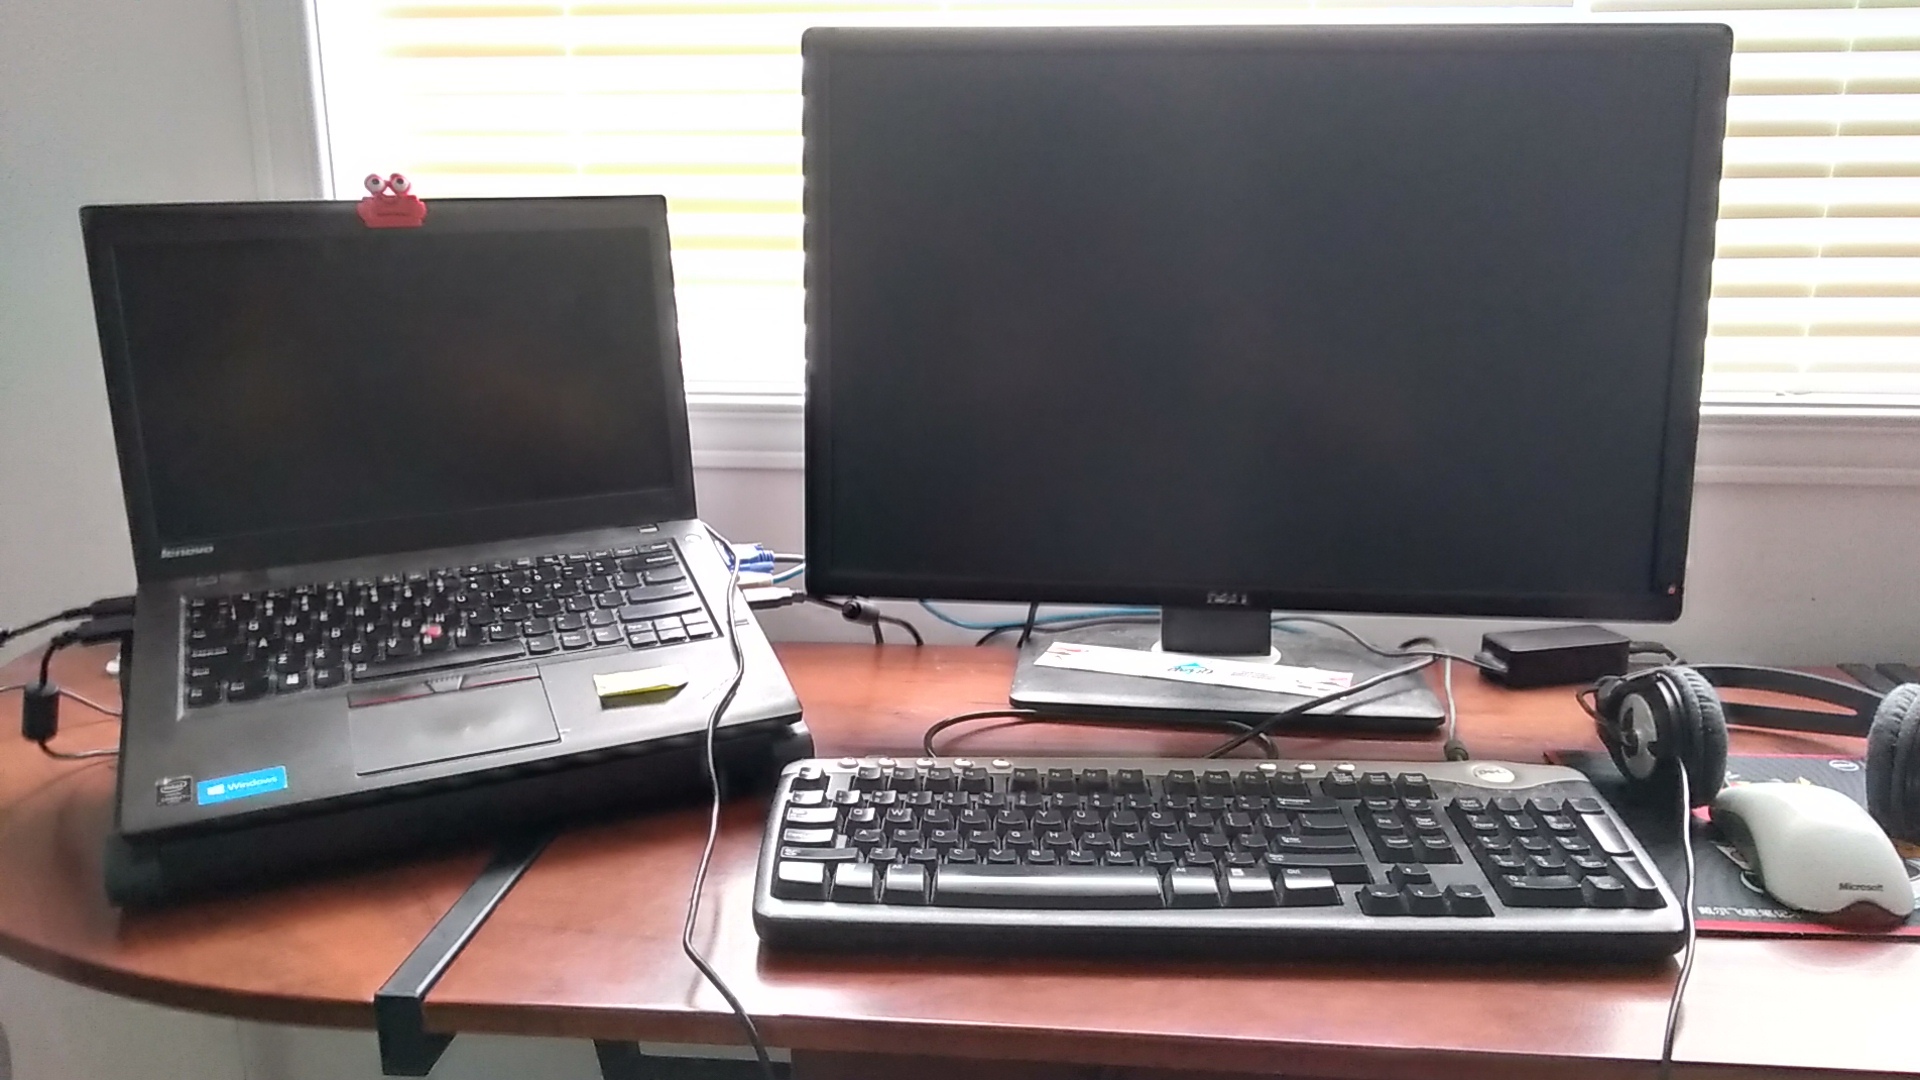 My work setup with a Lenovo T450 laptop and Dell 24 inch monitor